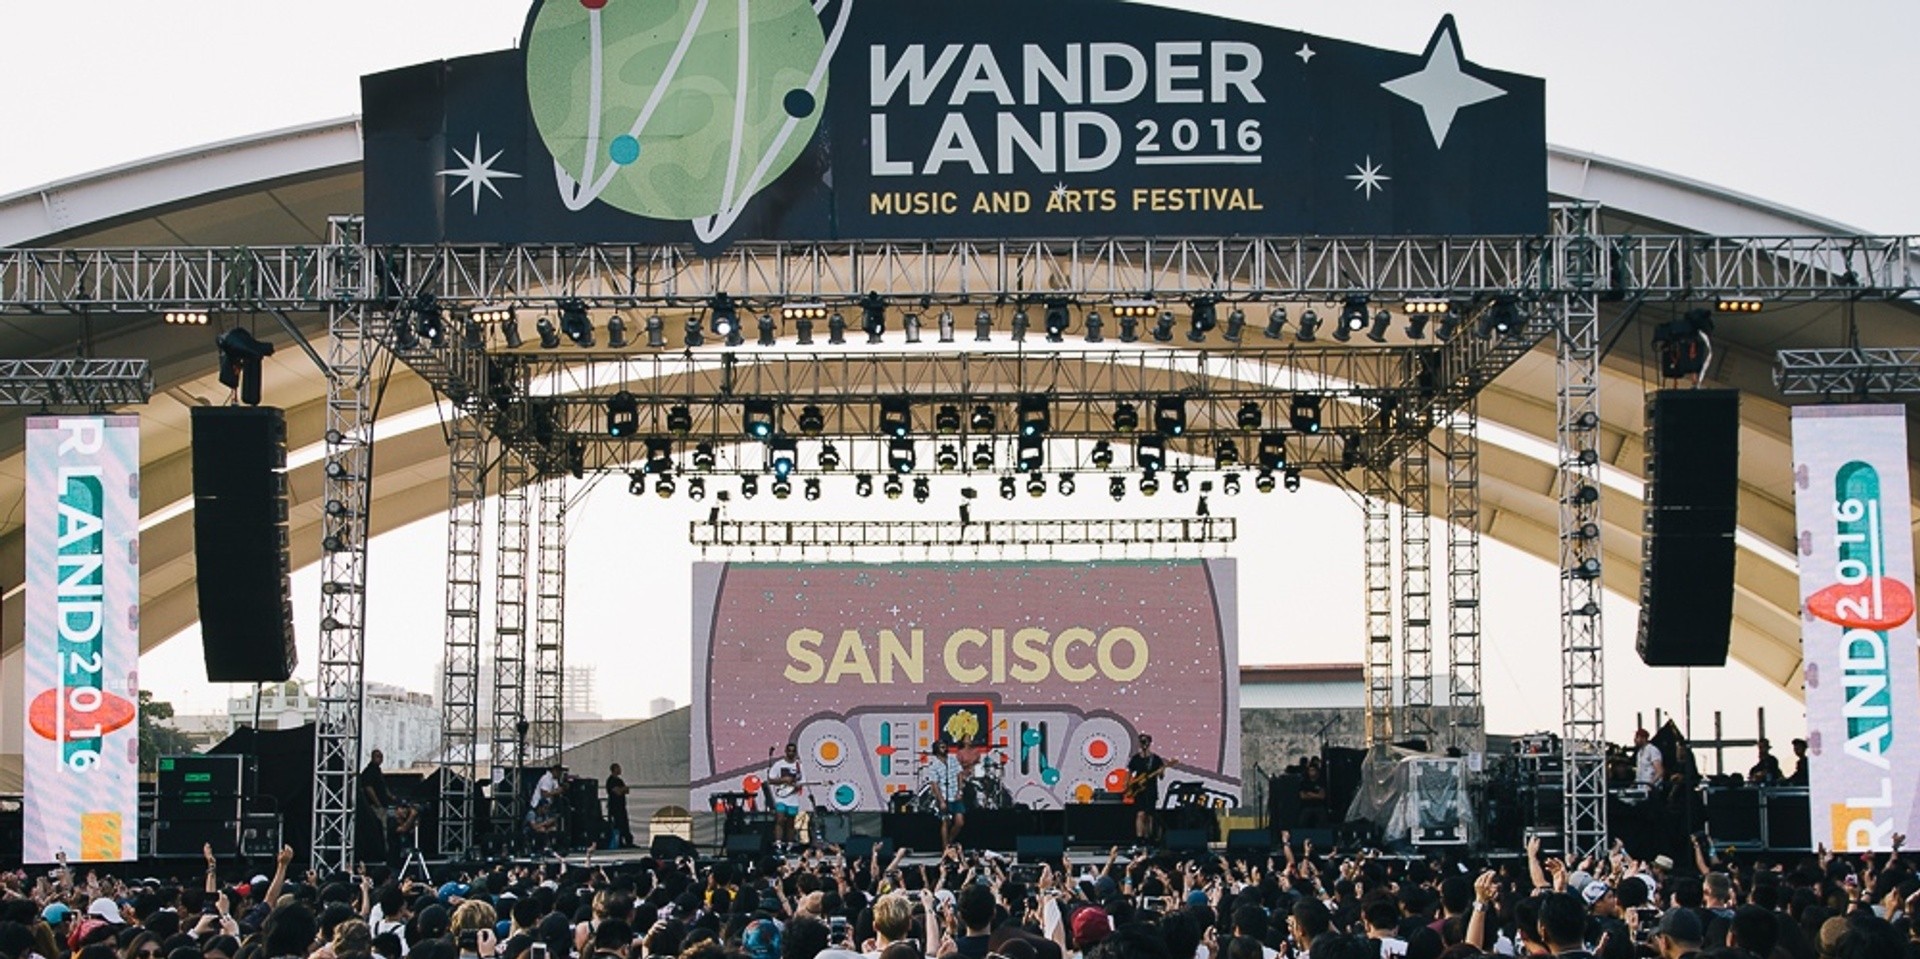 WATCH: Wanderland Music and Arts Festival official video recap of the 2016 edition